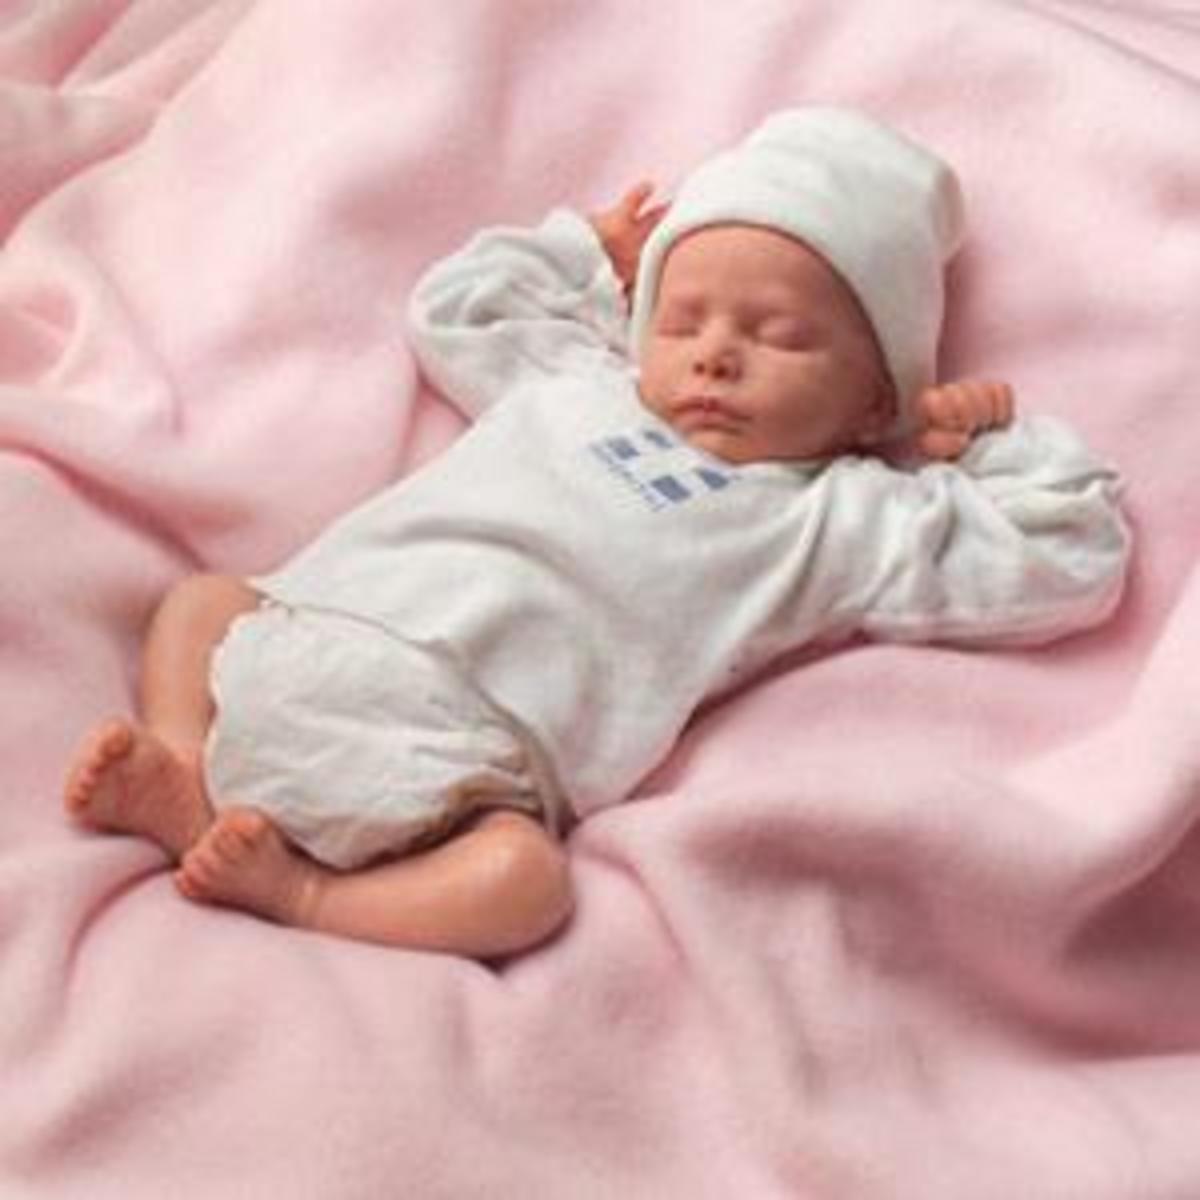 Newborn Baby Dolls That Look and act Real!